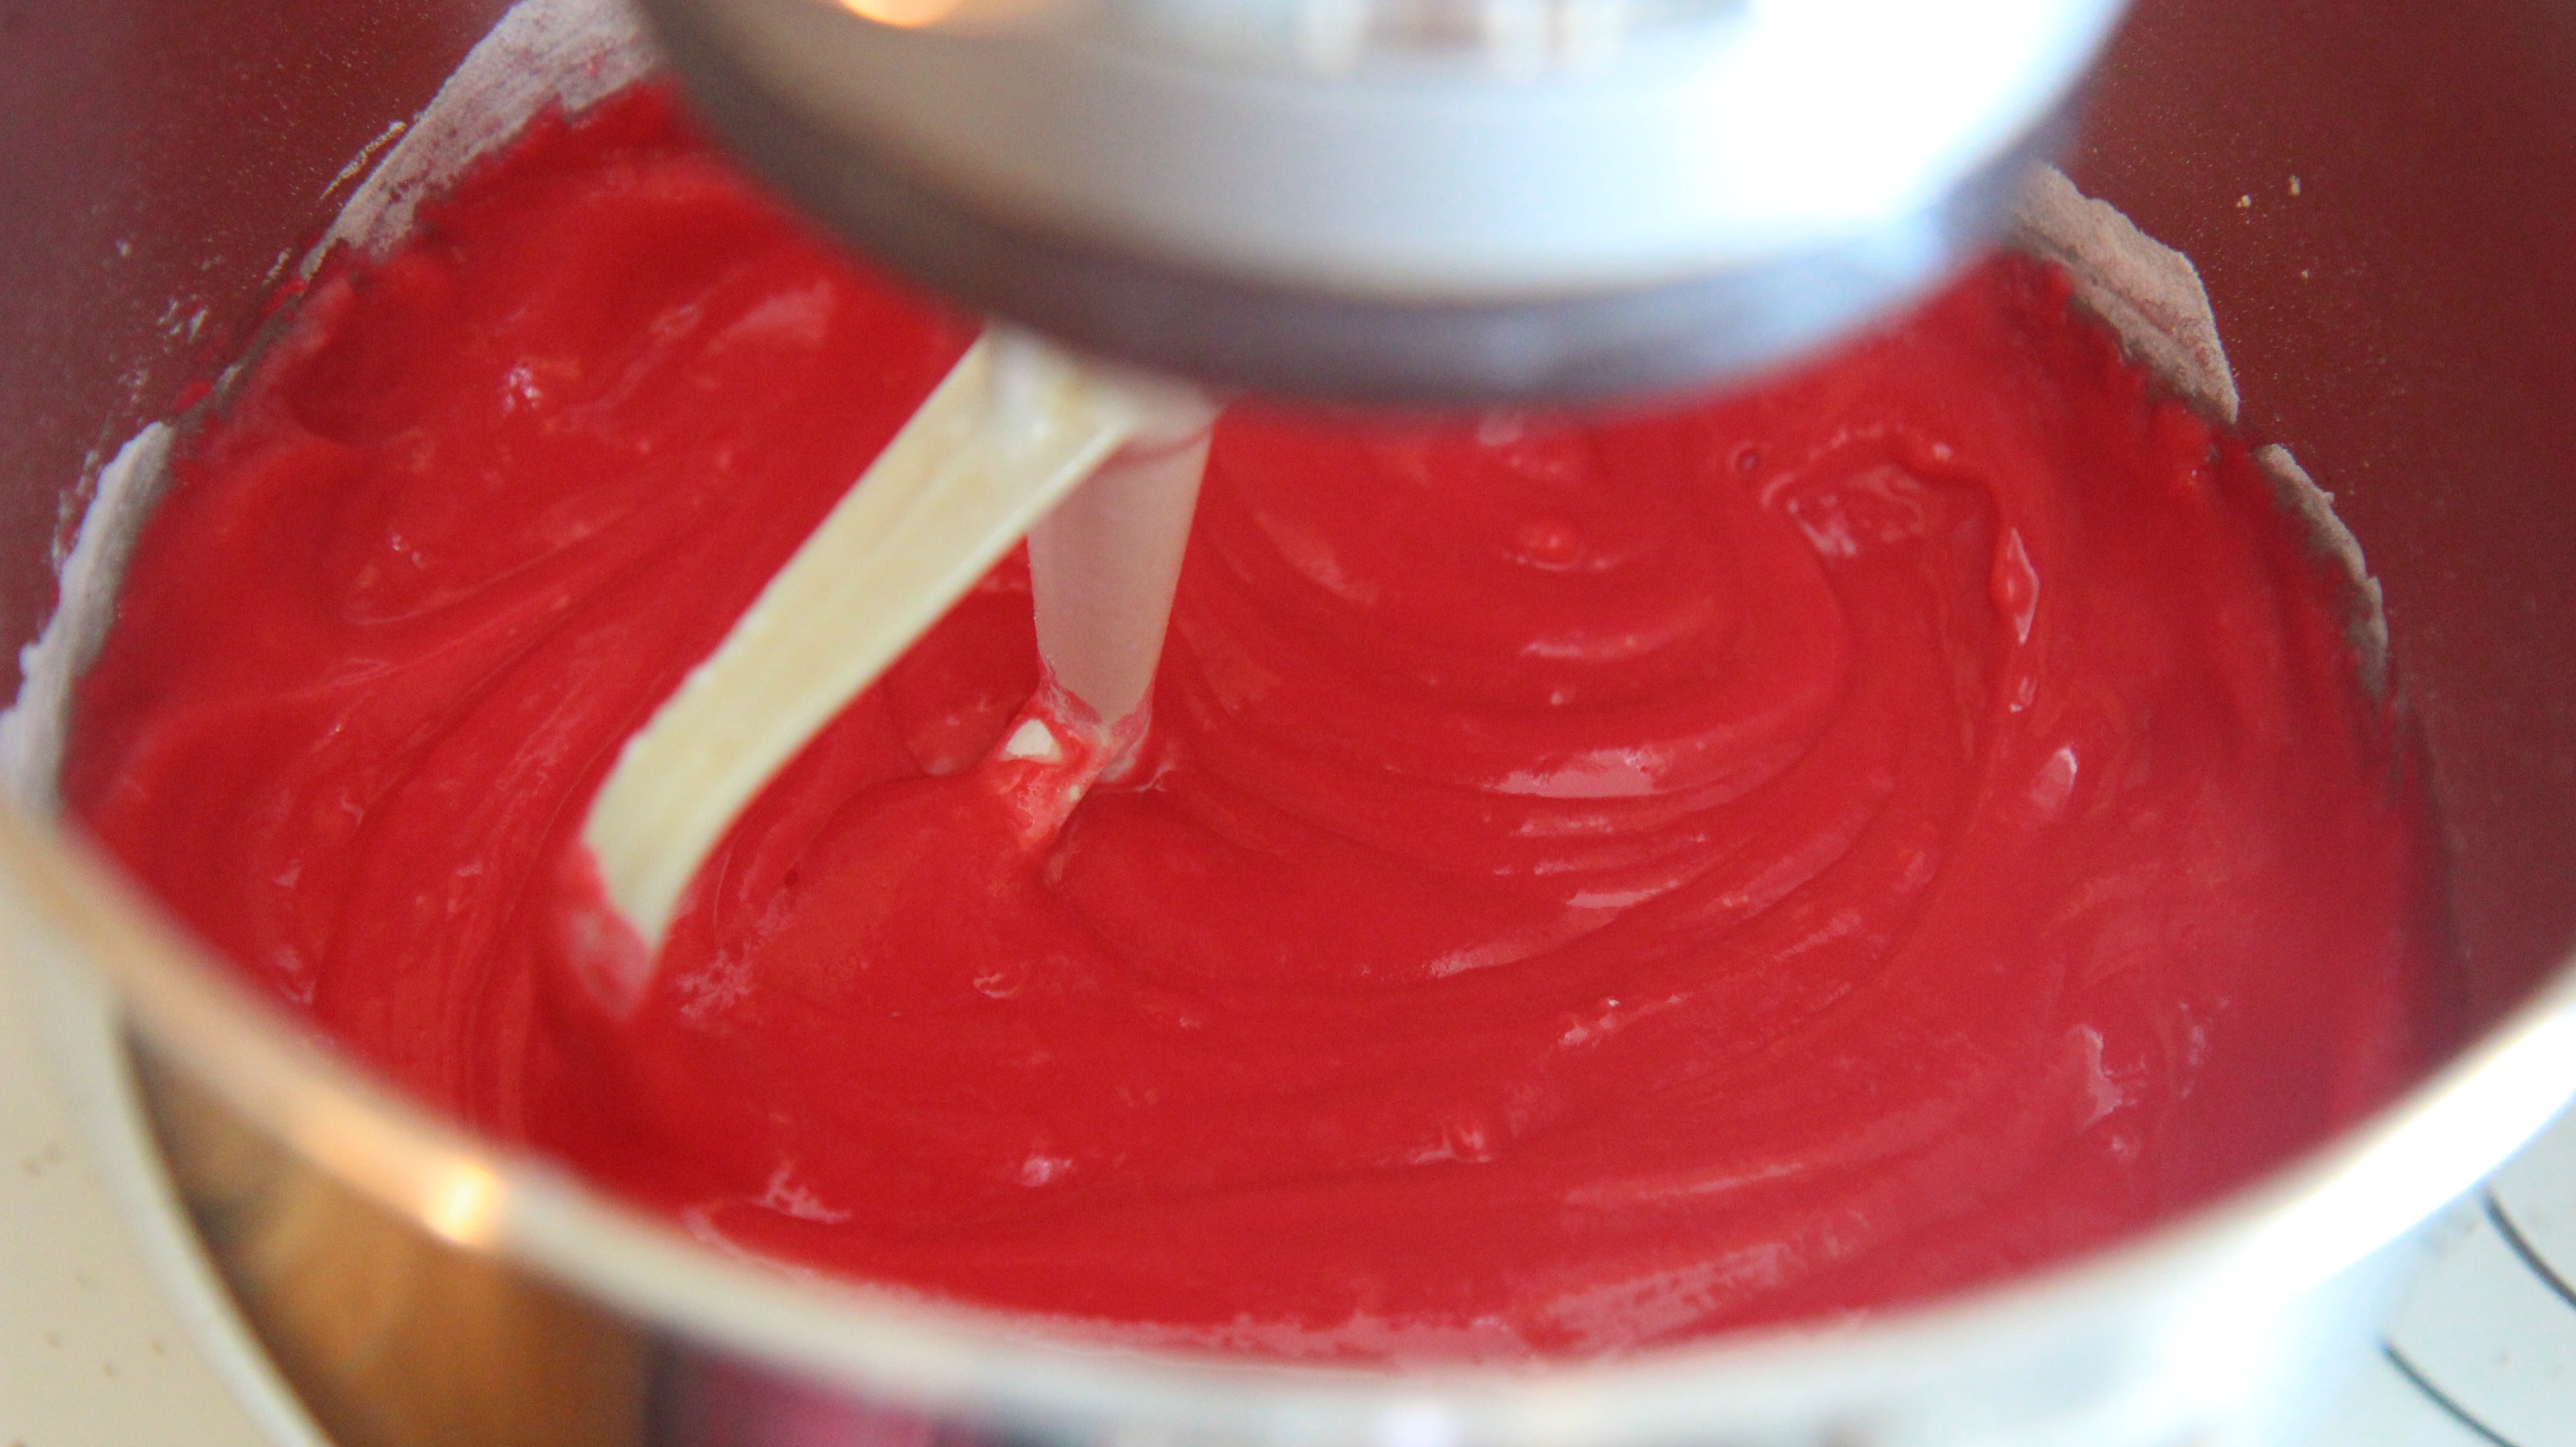 Mix and blend up the cake batter so it's bright and light